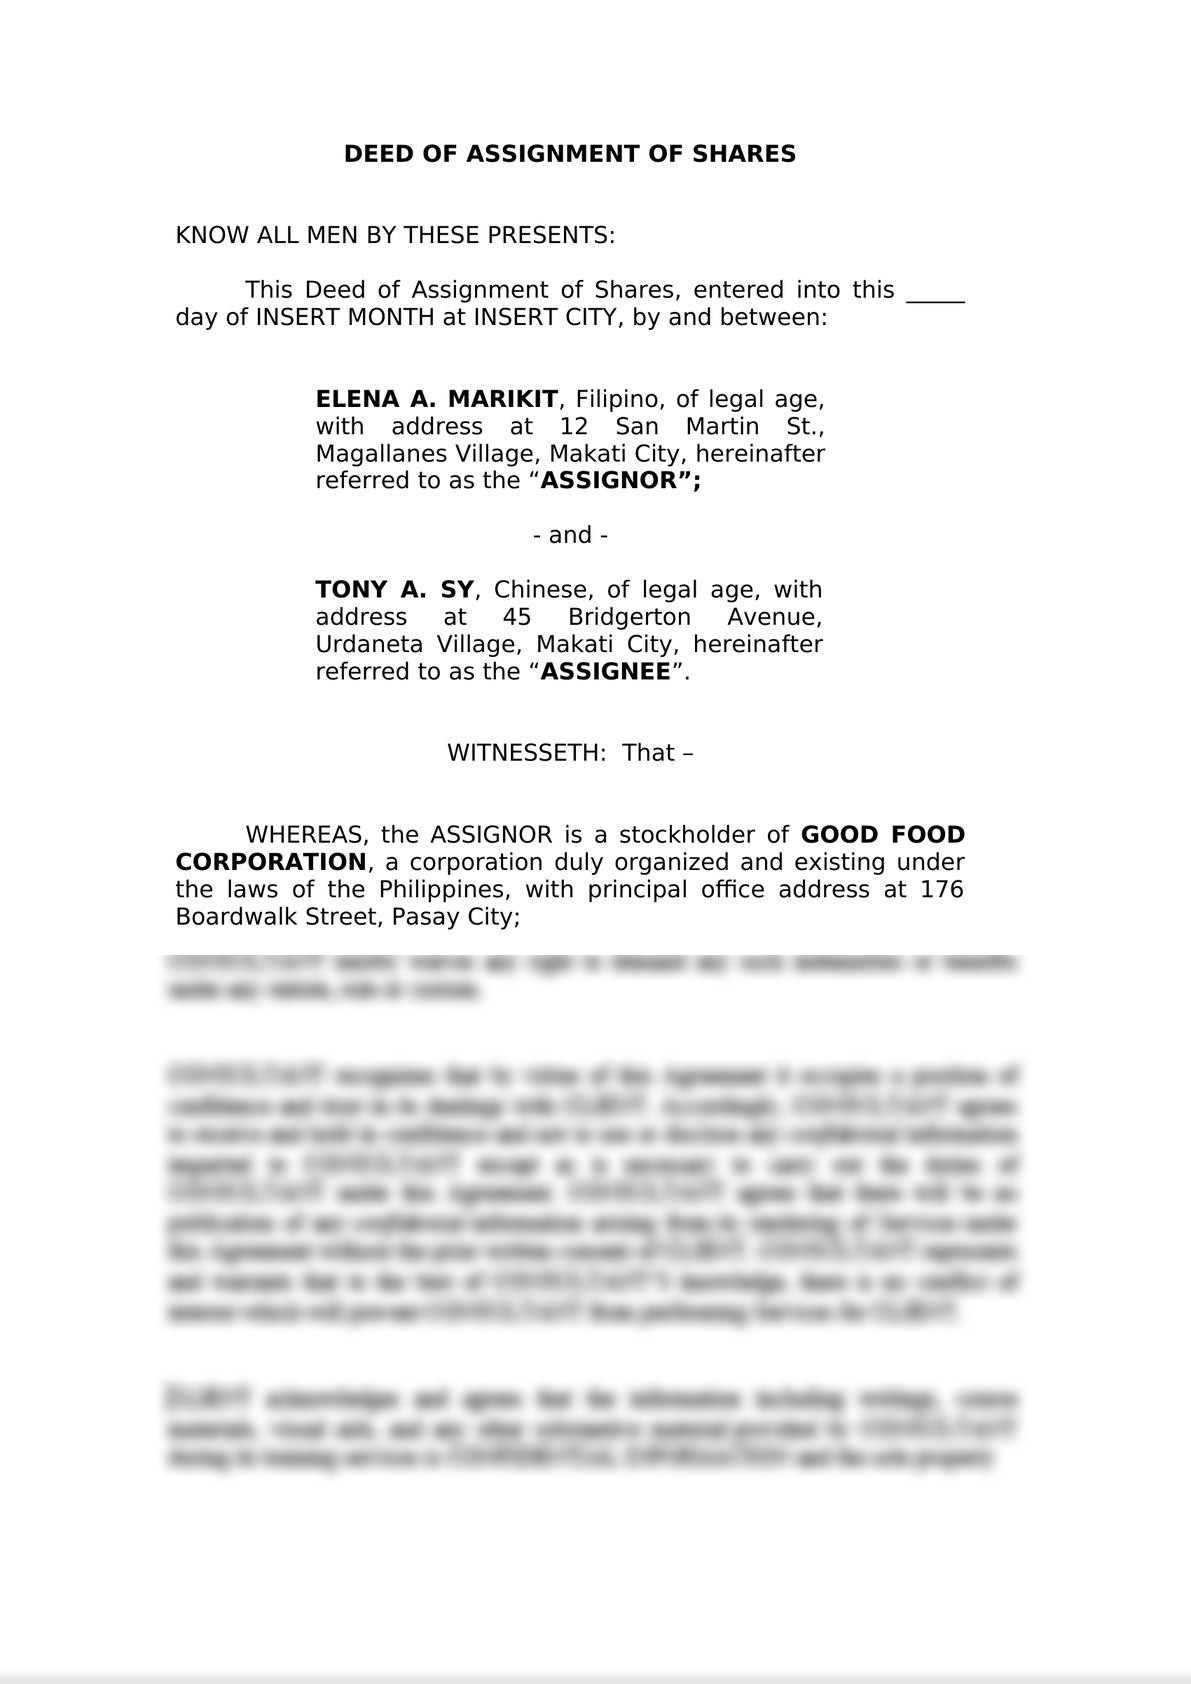 sample deed of assignment of shares of stock philippines